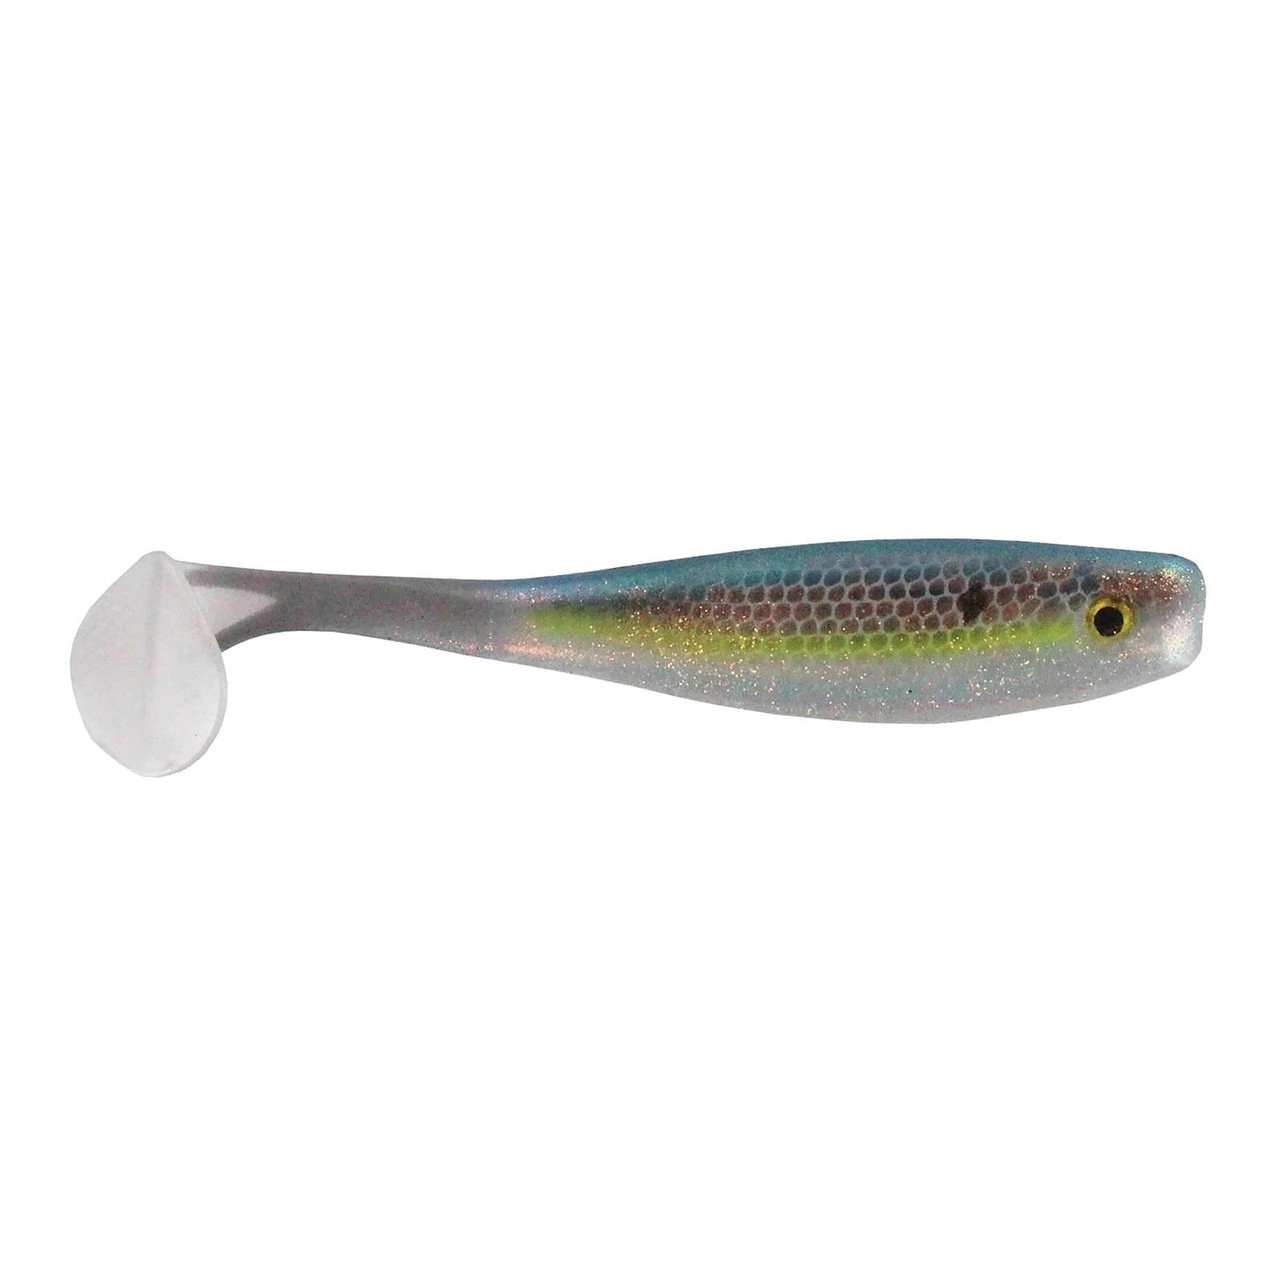 Big Bite Baits Suicide Shad 3.5 - Pink Silver